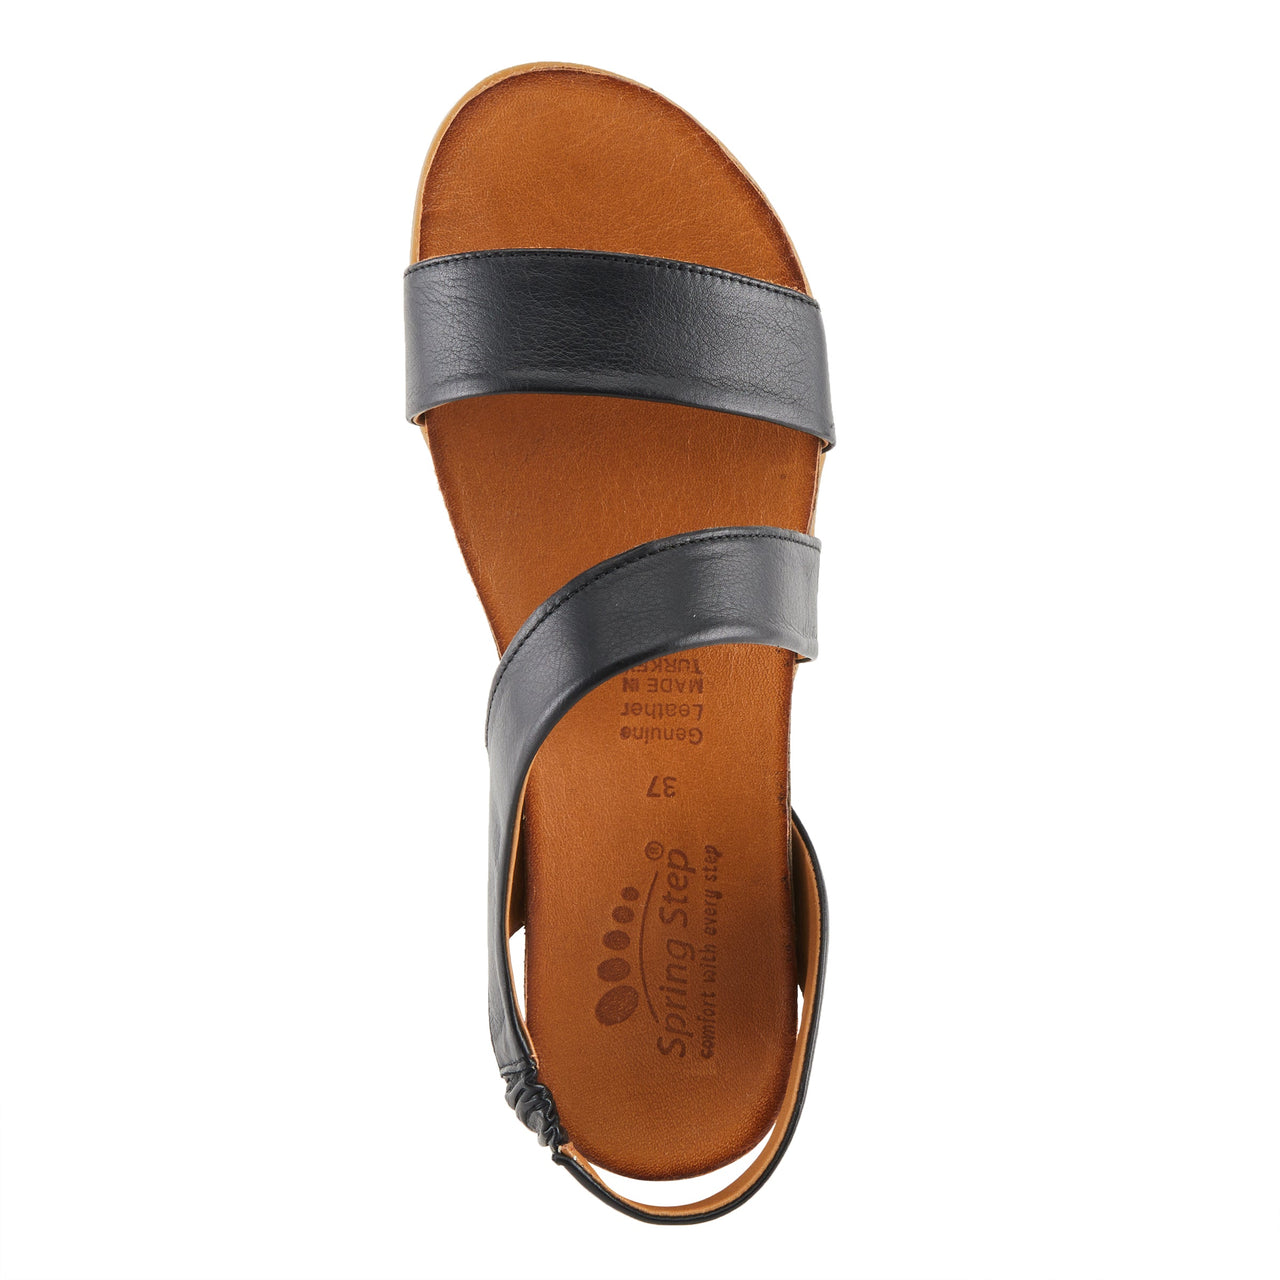 Beautiful and stylish Spring Step Besitos sandals, perfect for a summer day out